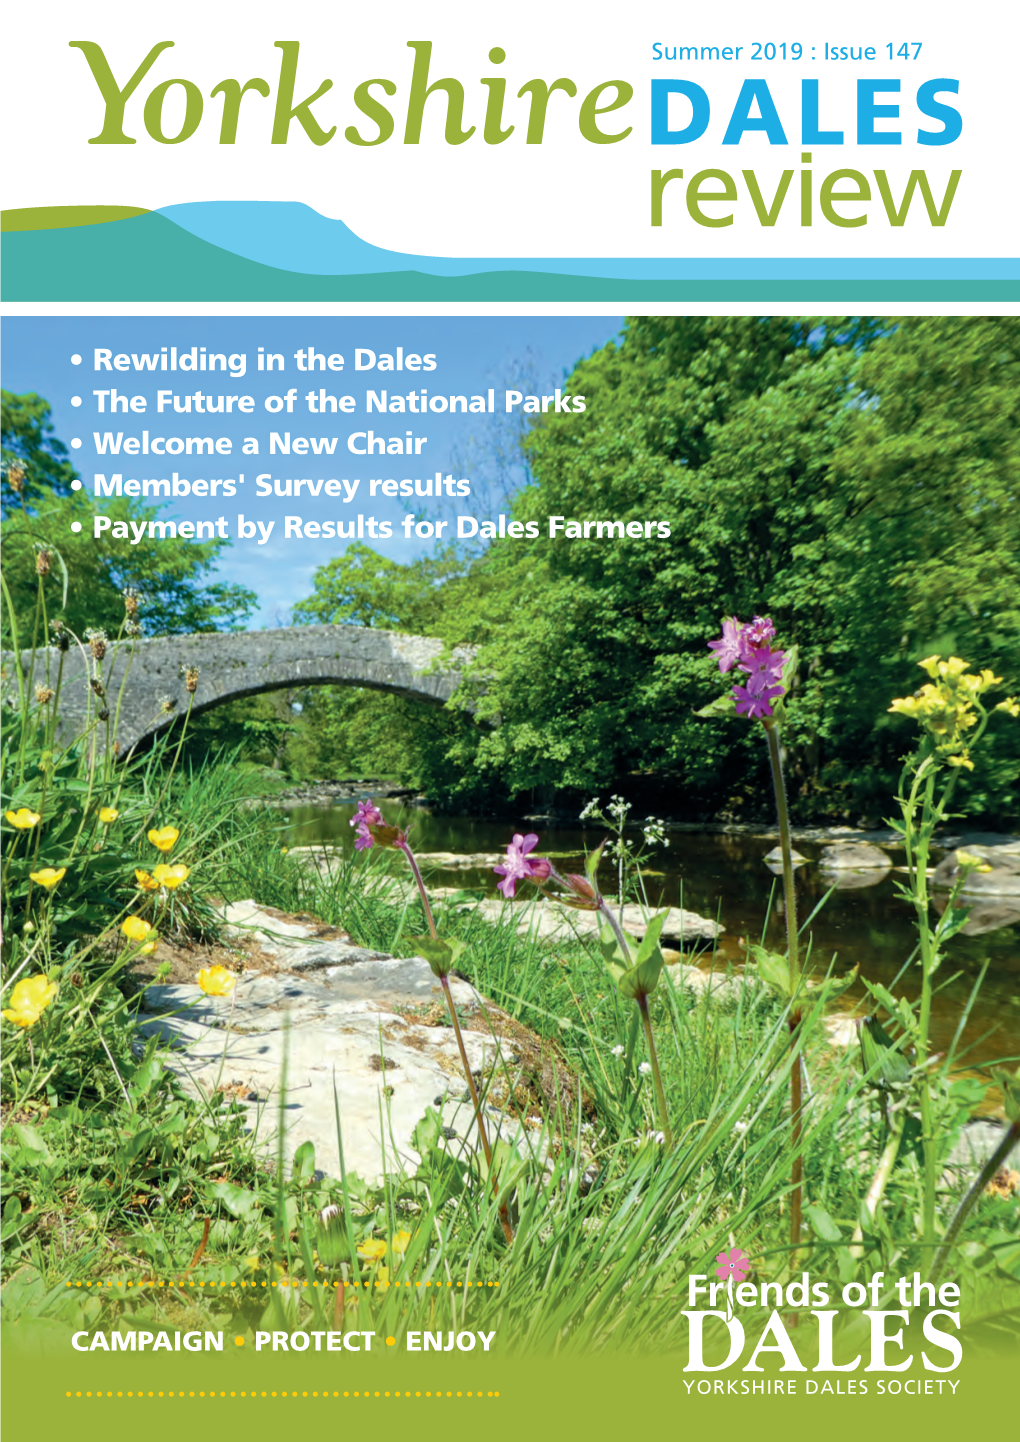 Rewilding in the Dales • the Future of the National Parks • Welcome a New Chair • Members' Survey Results • Payment by Results for Dales Farmers